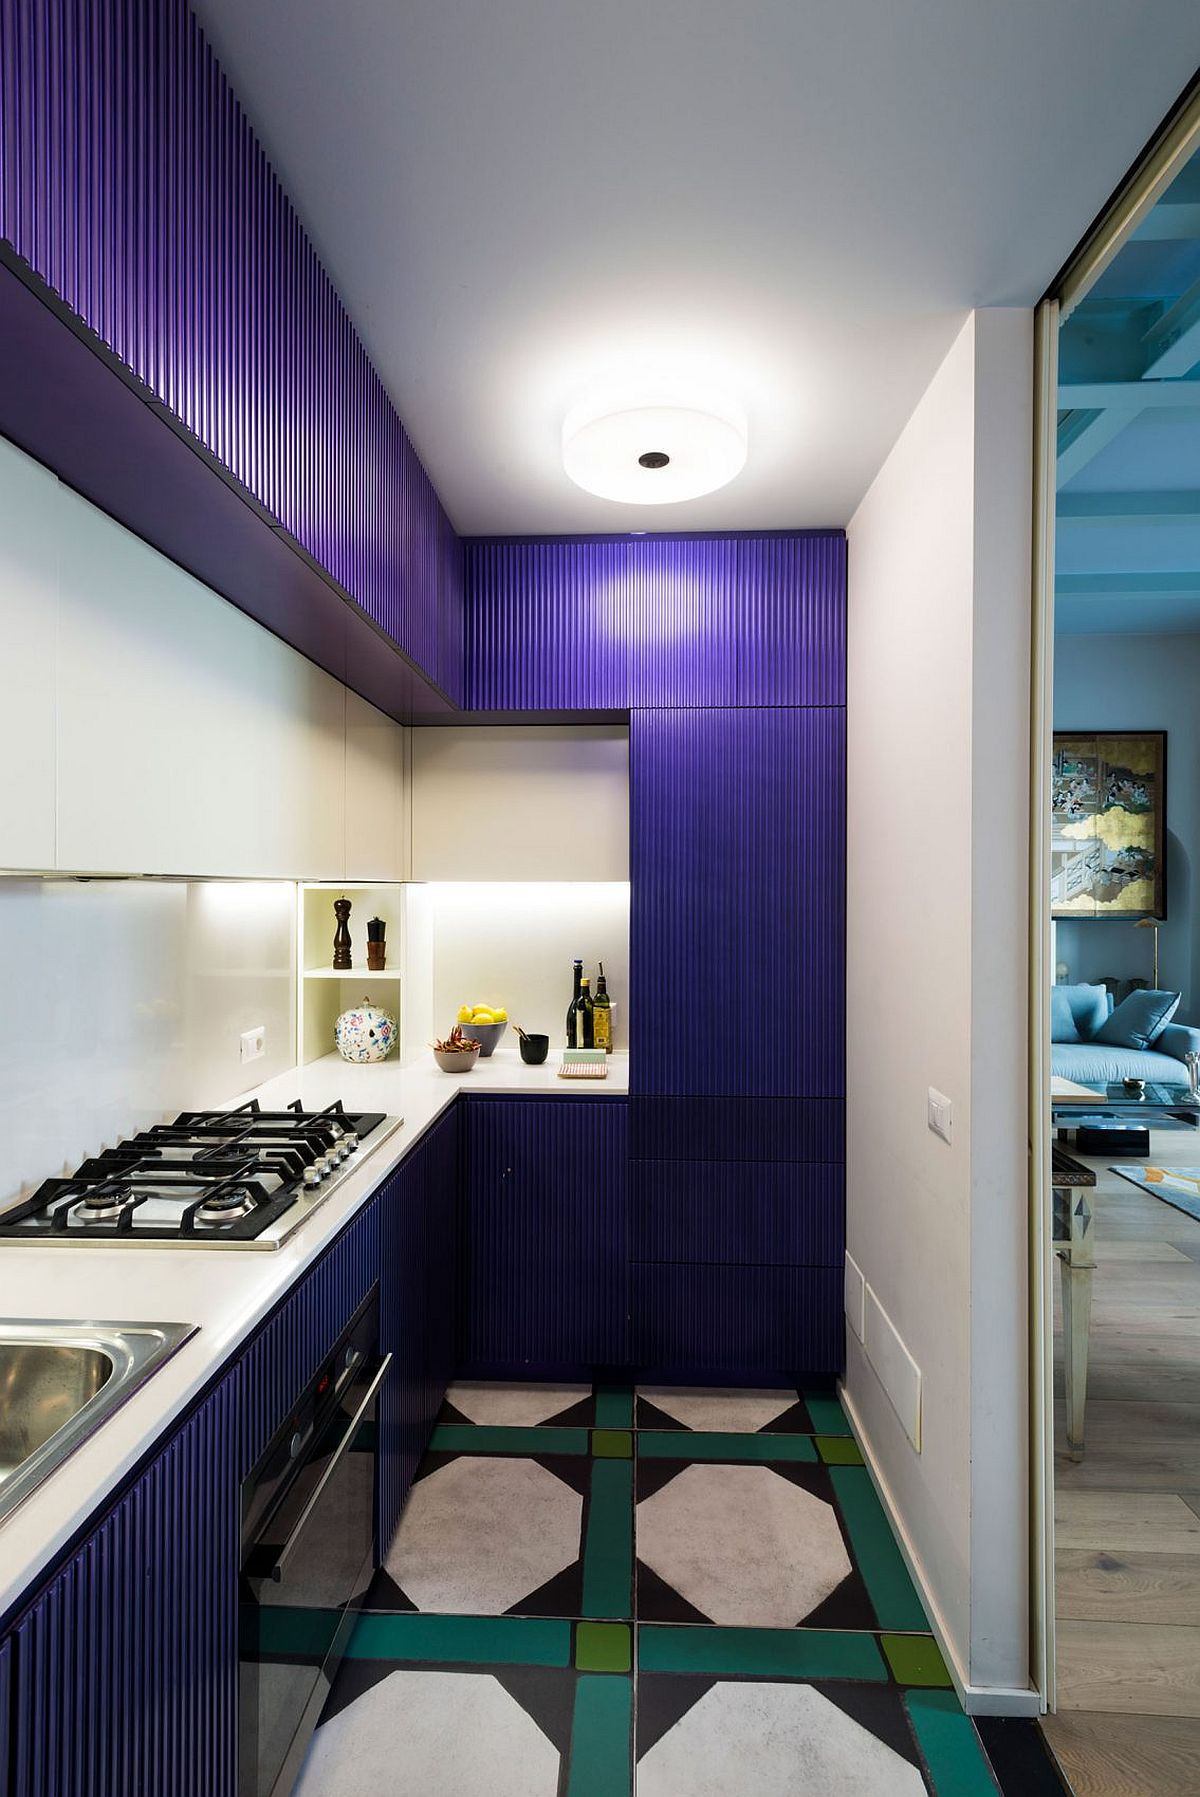 Kitchen cabinets in blue add both color and textural contrast to the small kitchen